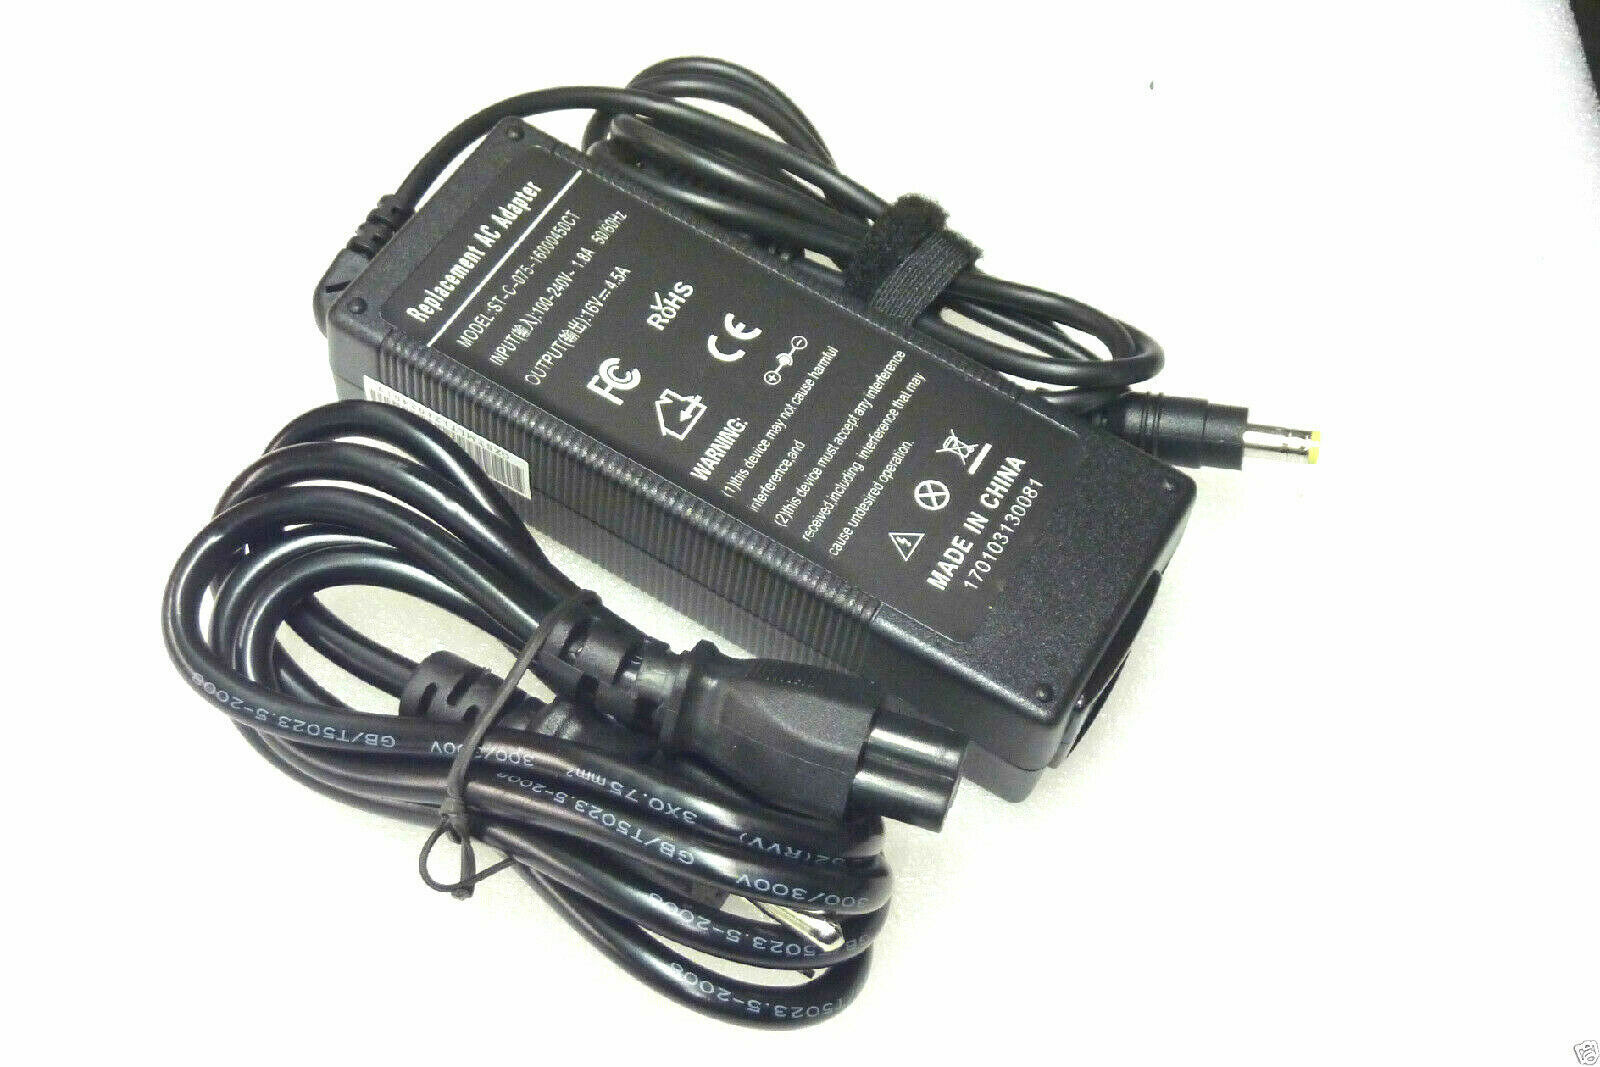 For IBM Thinkpad A20p Type 2629 AC Adapter Power Cord Battery Charger 16V 4.5A 